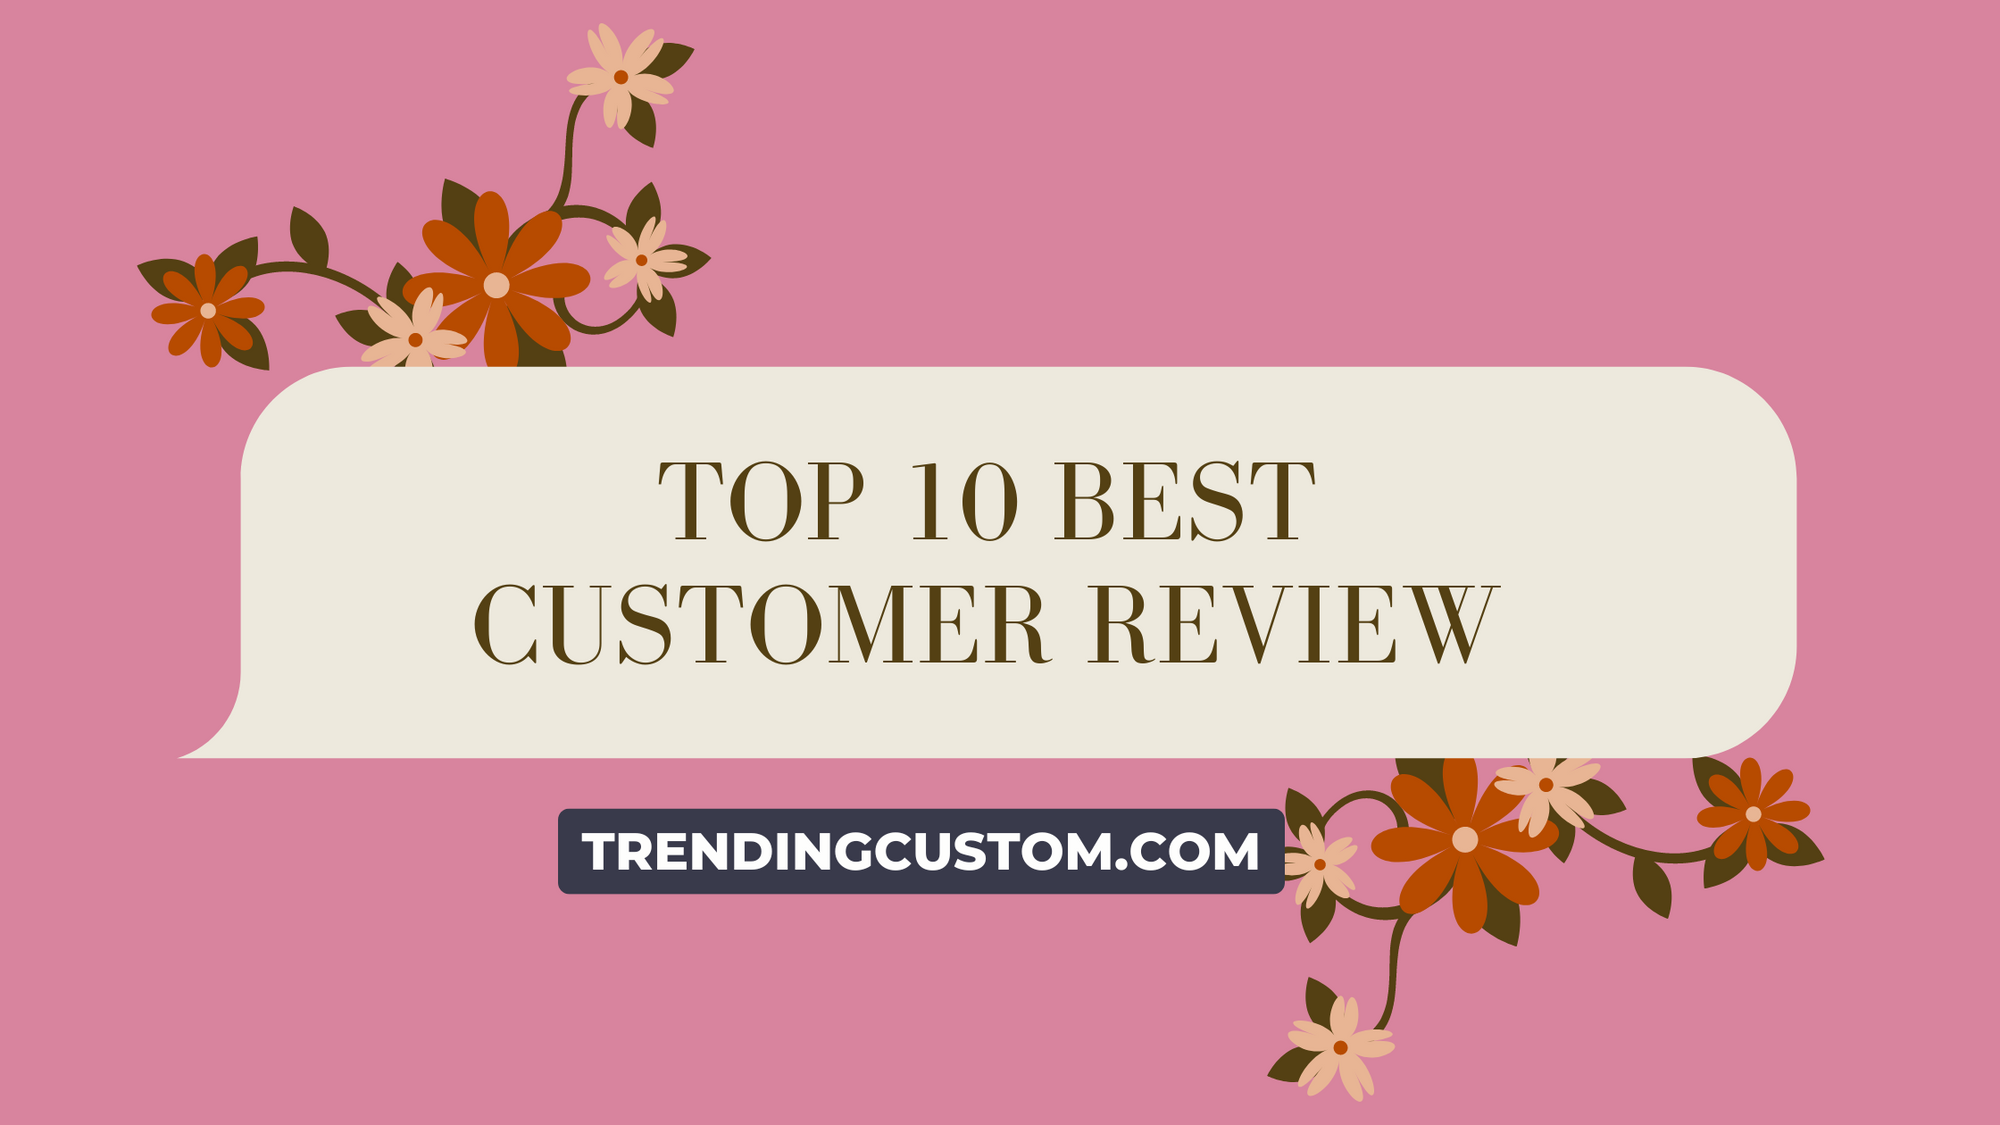 Top 10 Raving Reviews: Our Customers Speak Out! - March 18th